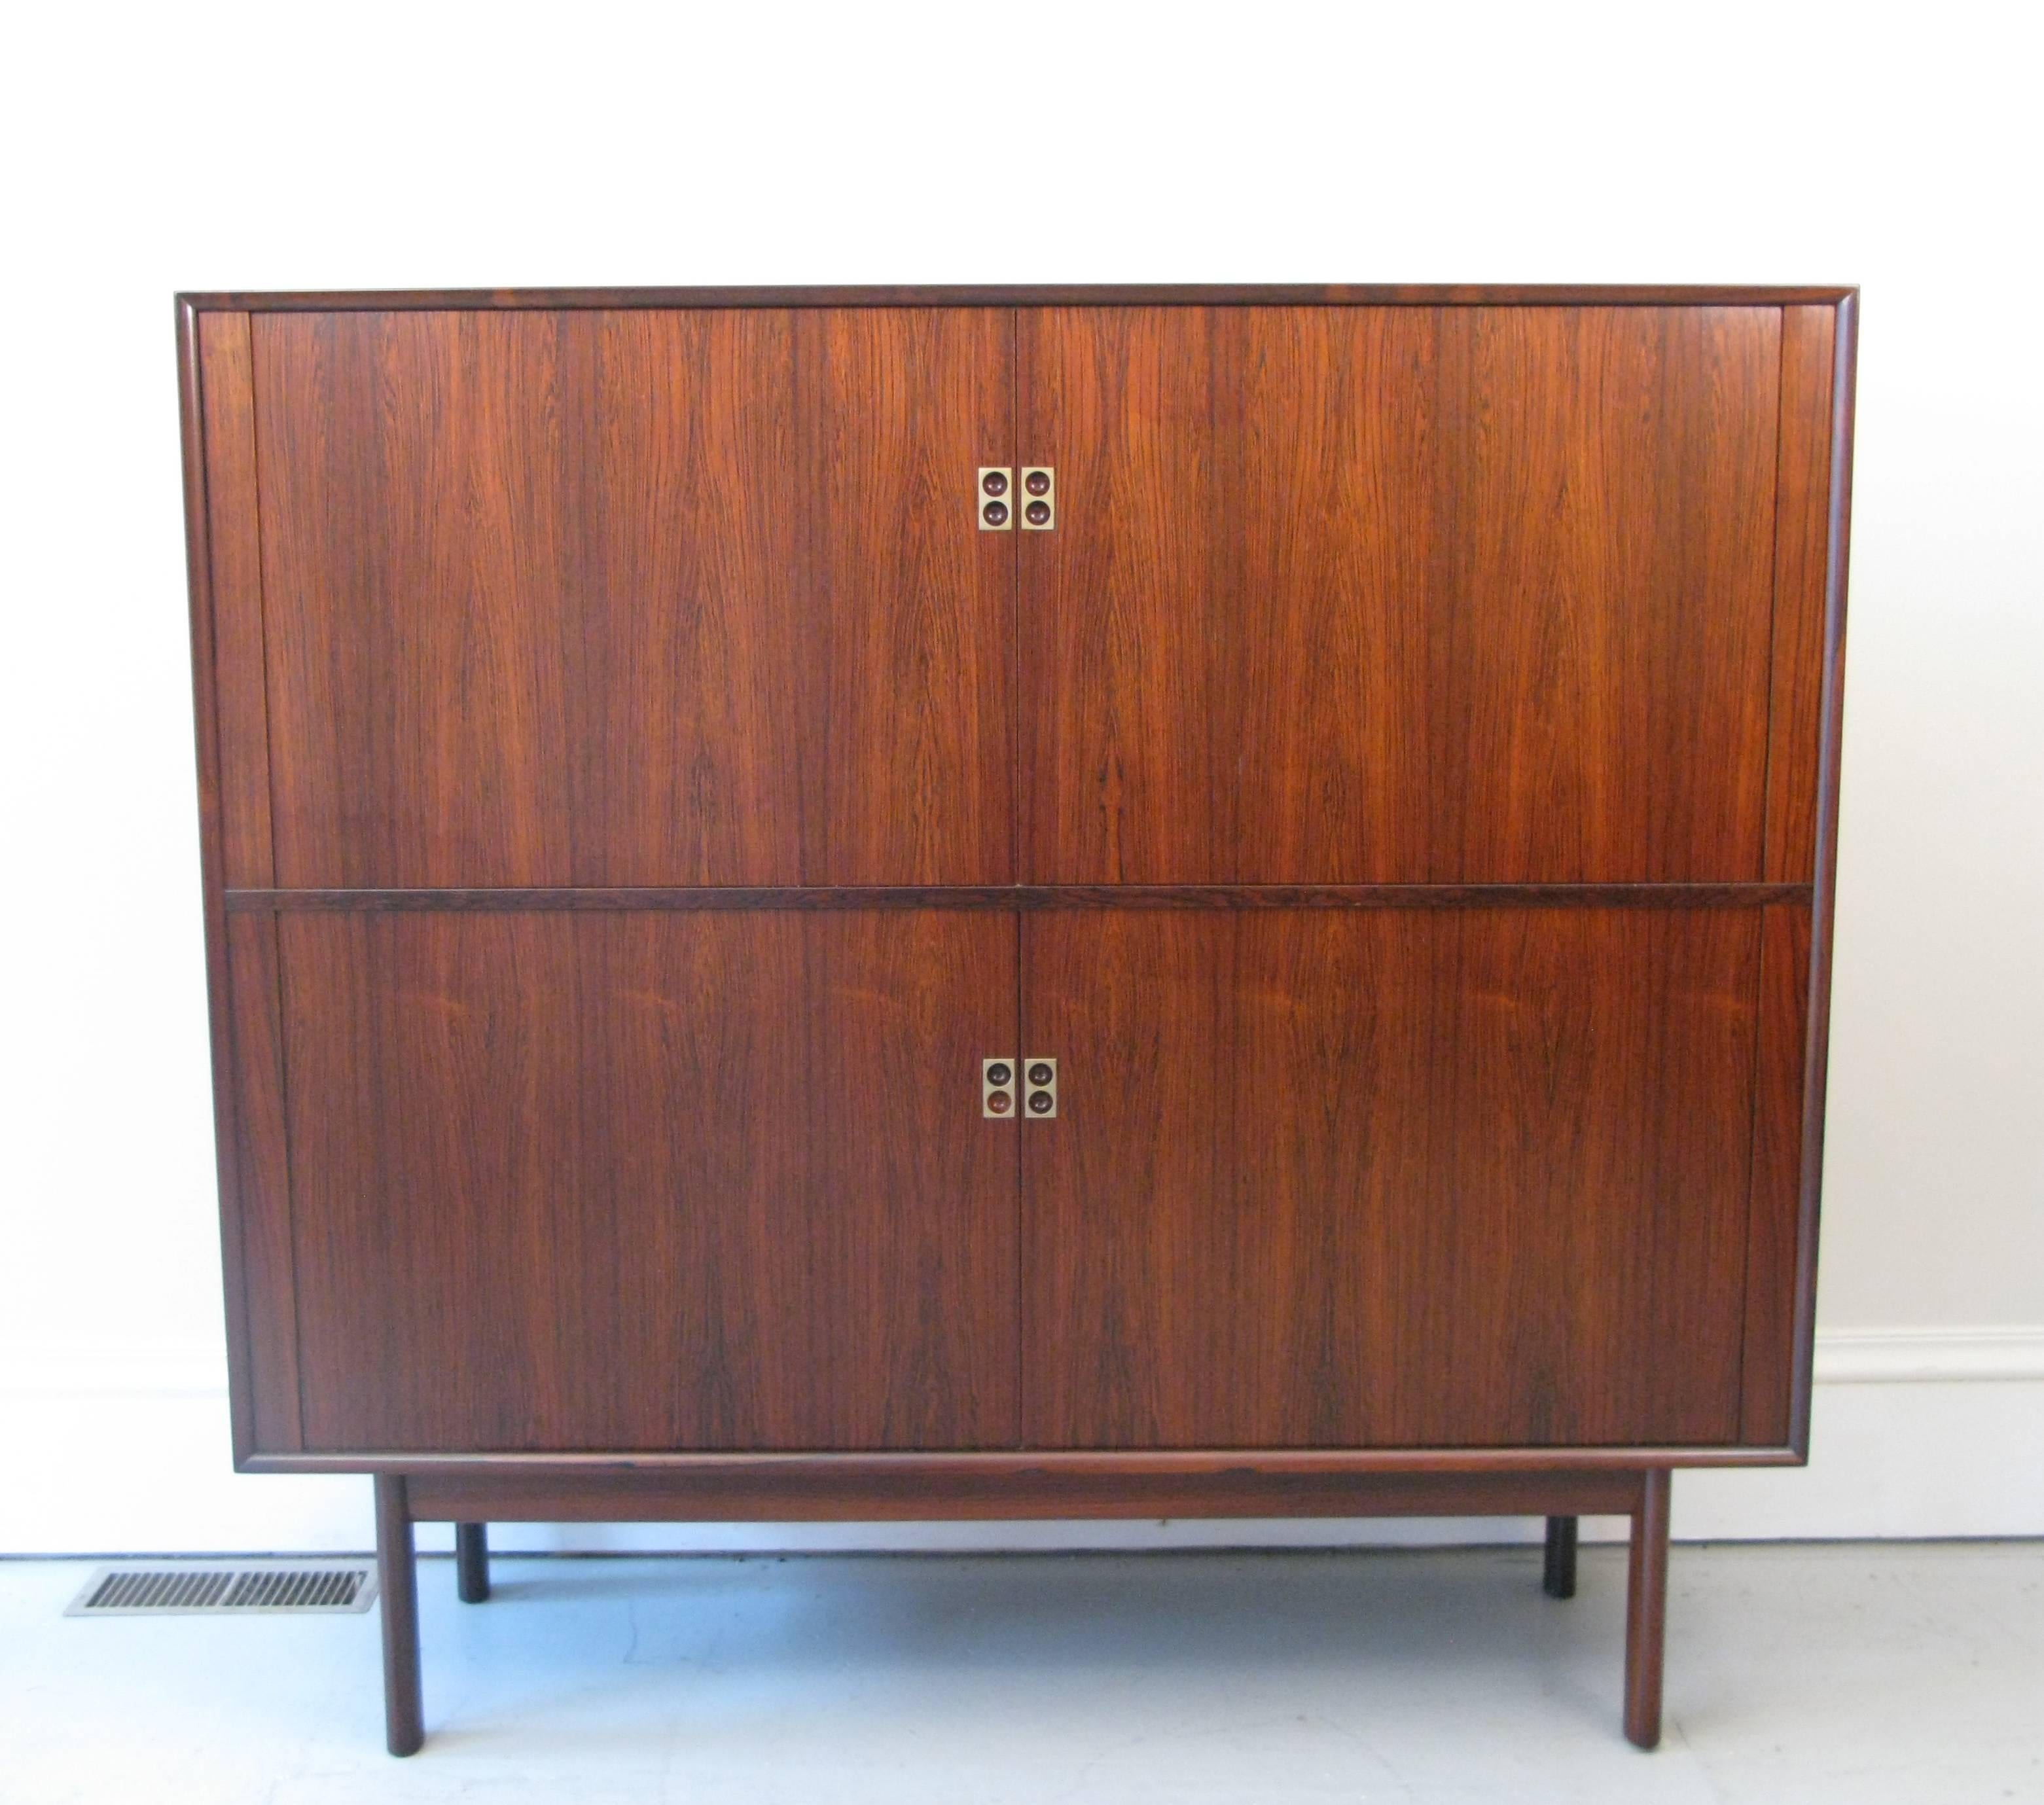 Pair of 1950s Danish rosewood cabinets by Arne Vodder for Sibast. The cabinets have been restored to beautiful condition. Label is on the underside.